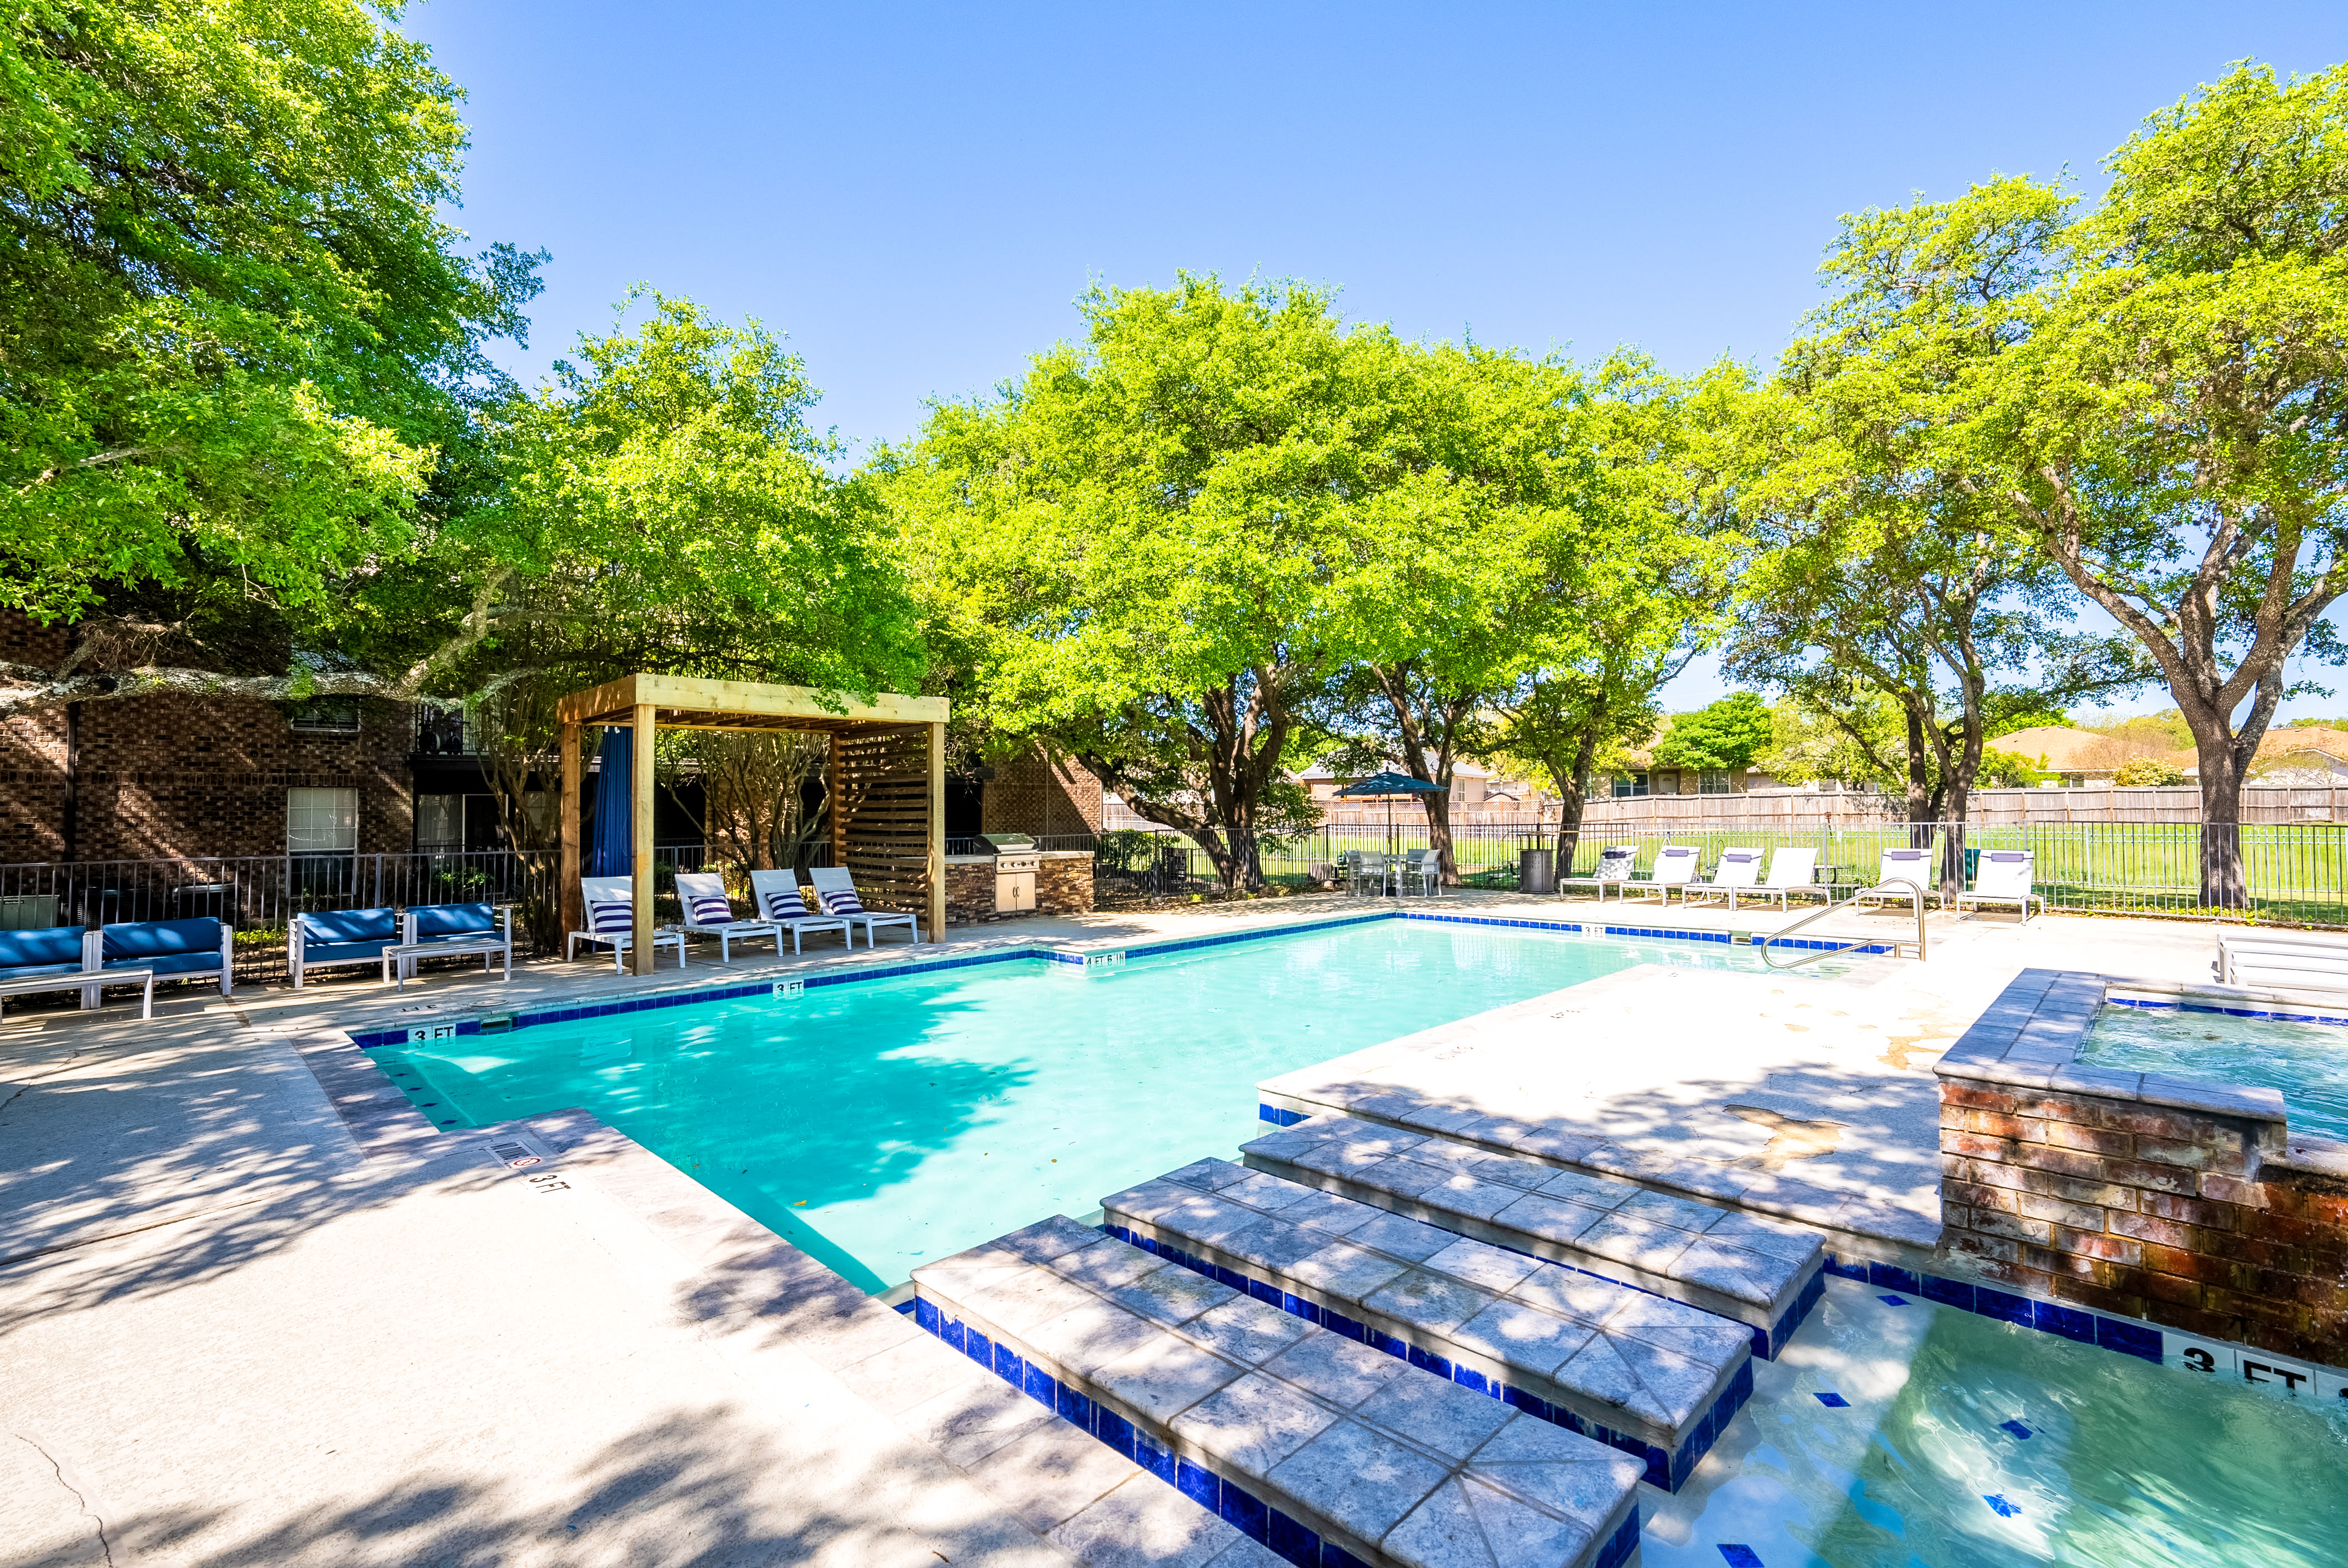 Pool and patio furniture at The Lennox in San Antonio, Texas